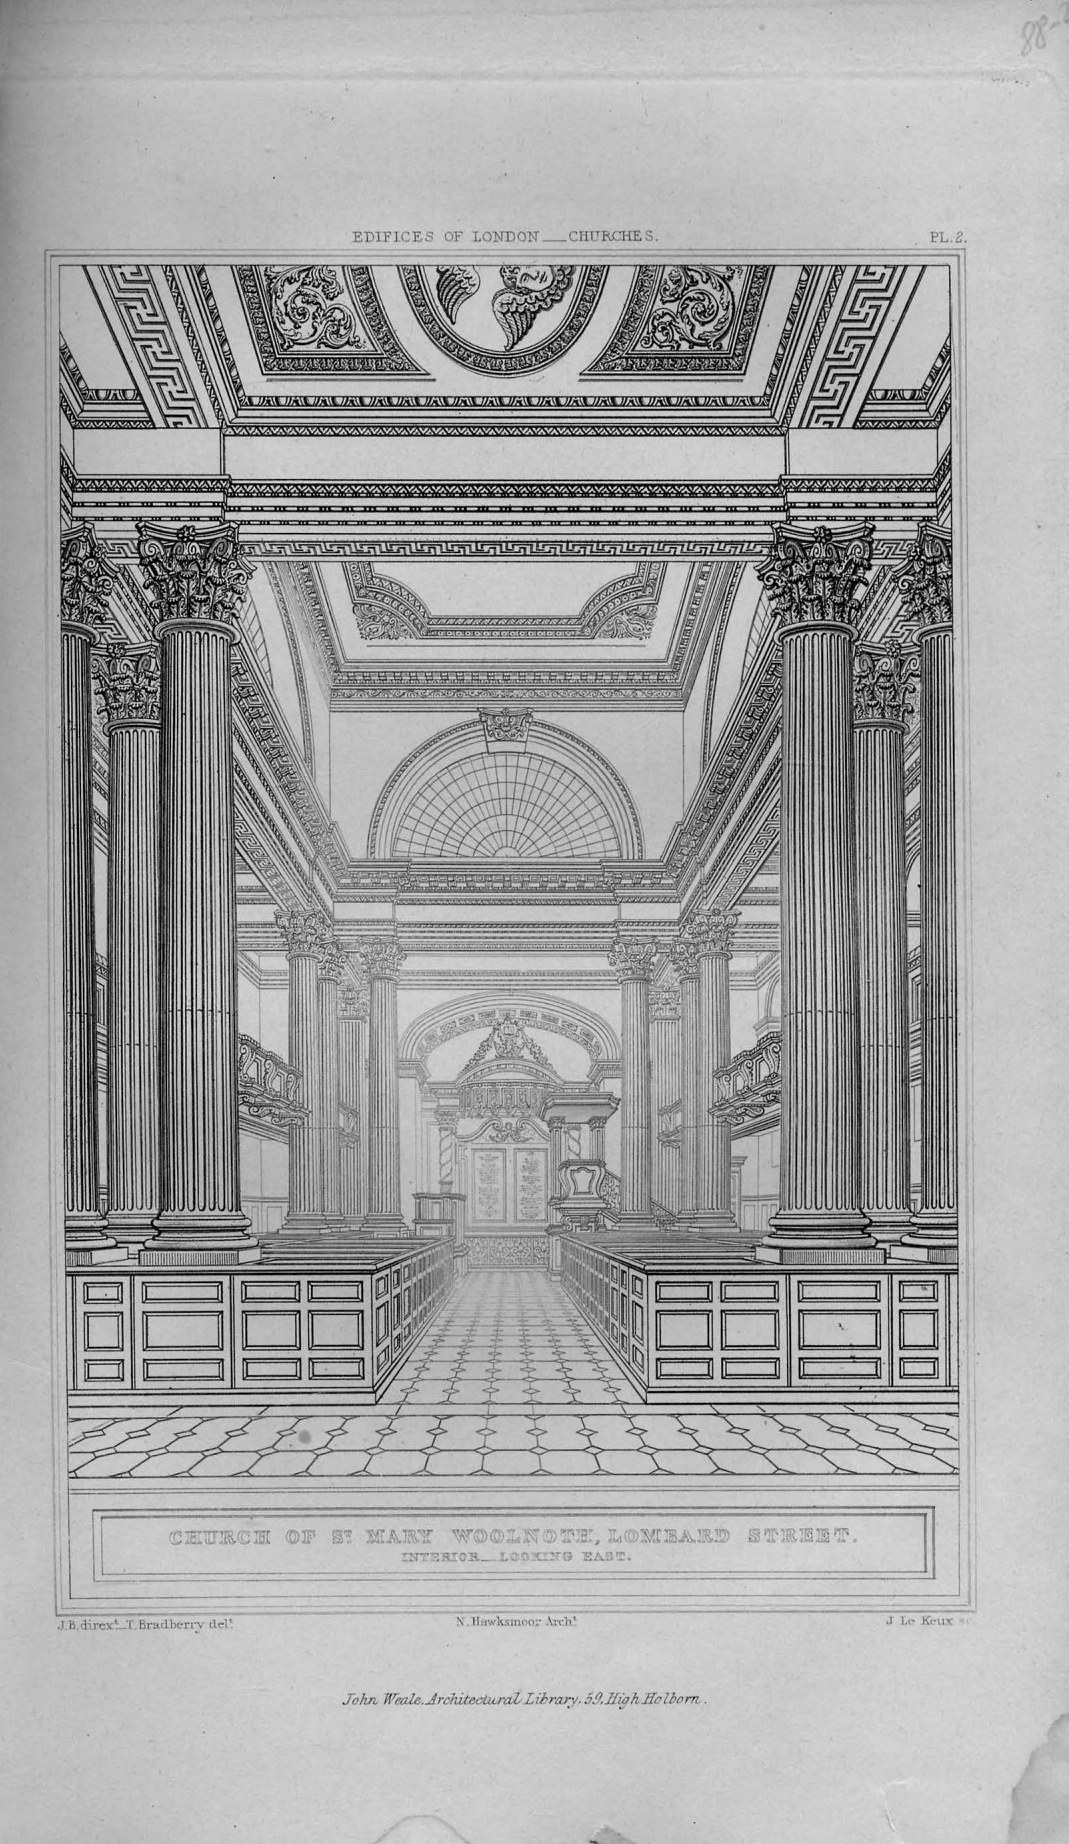 Illustrations of the public buildings of London : With historical and descriptive accounts of each edifice : In 2 volumes / by Pugin and Britton. — Second edition, greatly enlarged by W. H. Leeds. — London : John Weale, 1838